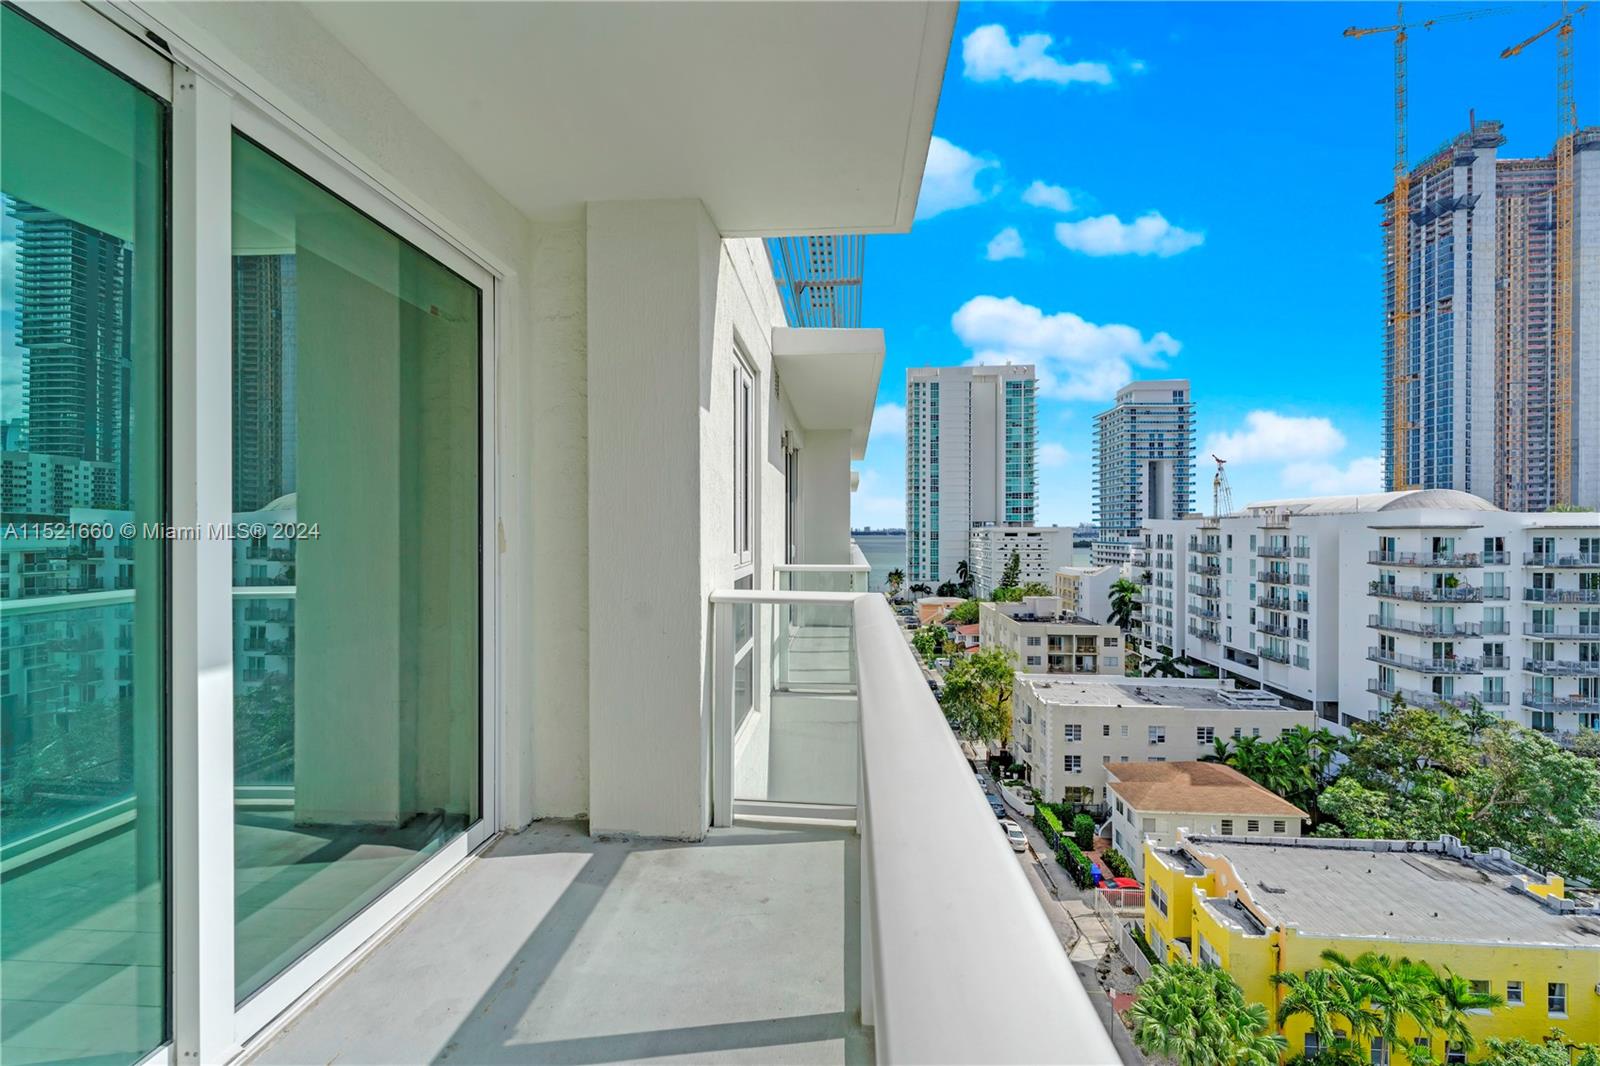 Welcome to the vibrant neighborhood of Edgewater in Miami! This stunning condo comes fully furnished and fully equipped. Ideal for convenience, comfort, & captures the essence of modern luxury living. One of a kind expansive balcony terrace & amenities that will truly elevate your lifestyle. Great inviting space for entertaining guests or simply enjoying a peaceful evening while providing breathtaking views. The building offers an exclusive rooftop pool & state-of-the-art gym equipment. Location is key, you'll find yourself at the center of it all, with easy access to Midtown, Brickell, the Design District, Wynwood, & the beach. Ample parking available & pet-friendly. Full-year lease preferred, seasonal rental OK. Let us help you make this dream residence a reality! Contact us today!